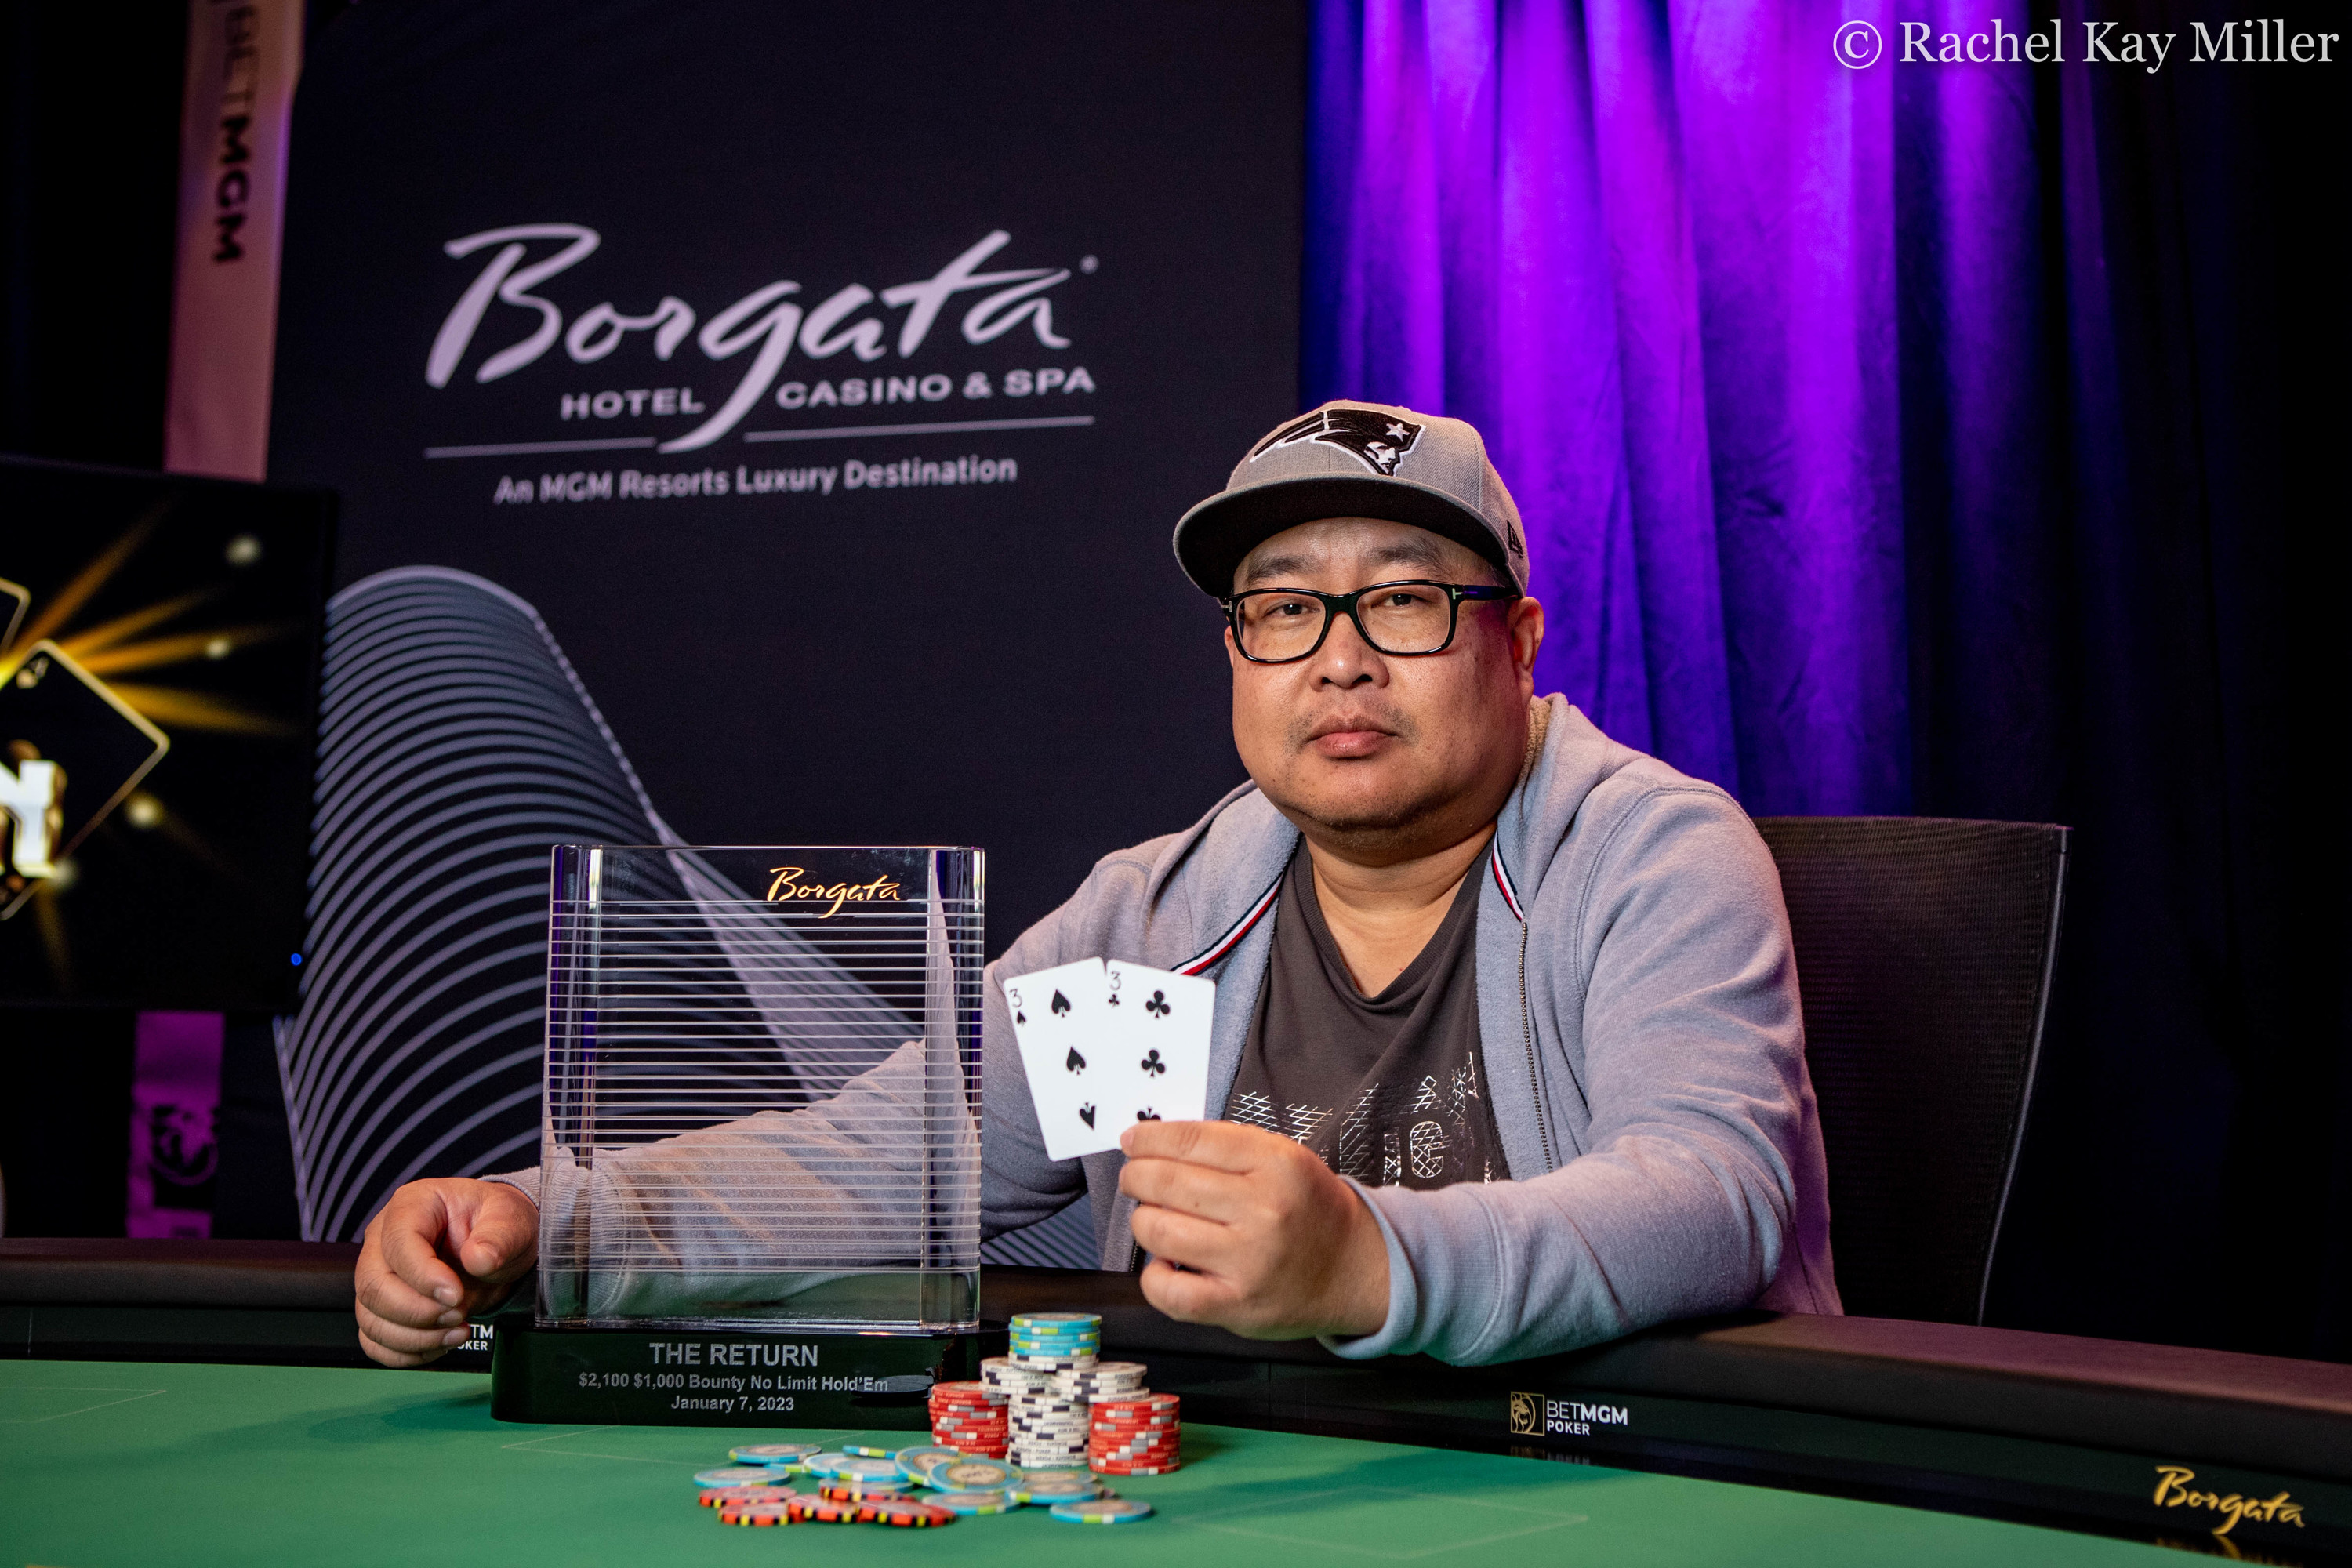 Soukha Kachittavong Gets Another Trophy in ,100 Bounty Event (,194)